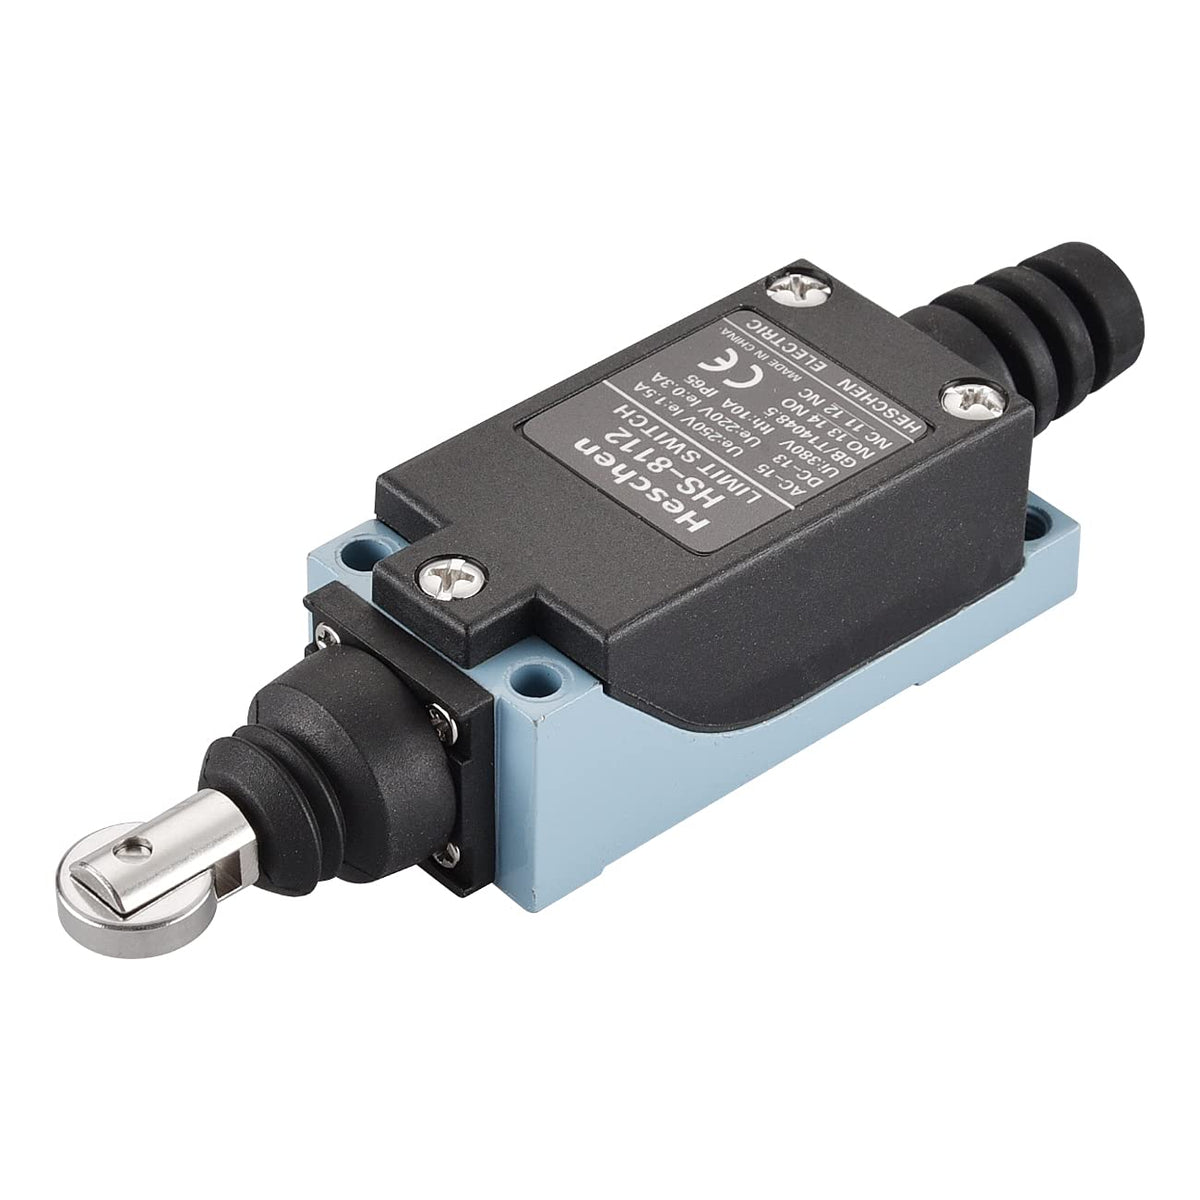 Parallel Roller Plunger Limit switch HS-8112(TZ-8112, ME-8112, XCE 102)  Enclosed NO NC Momentary